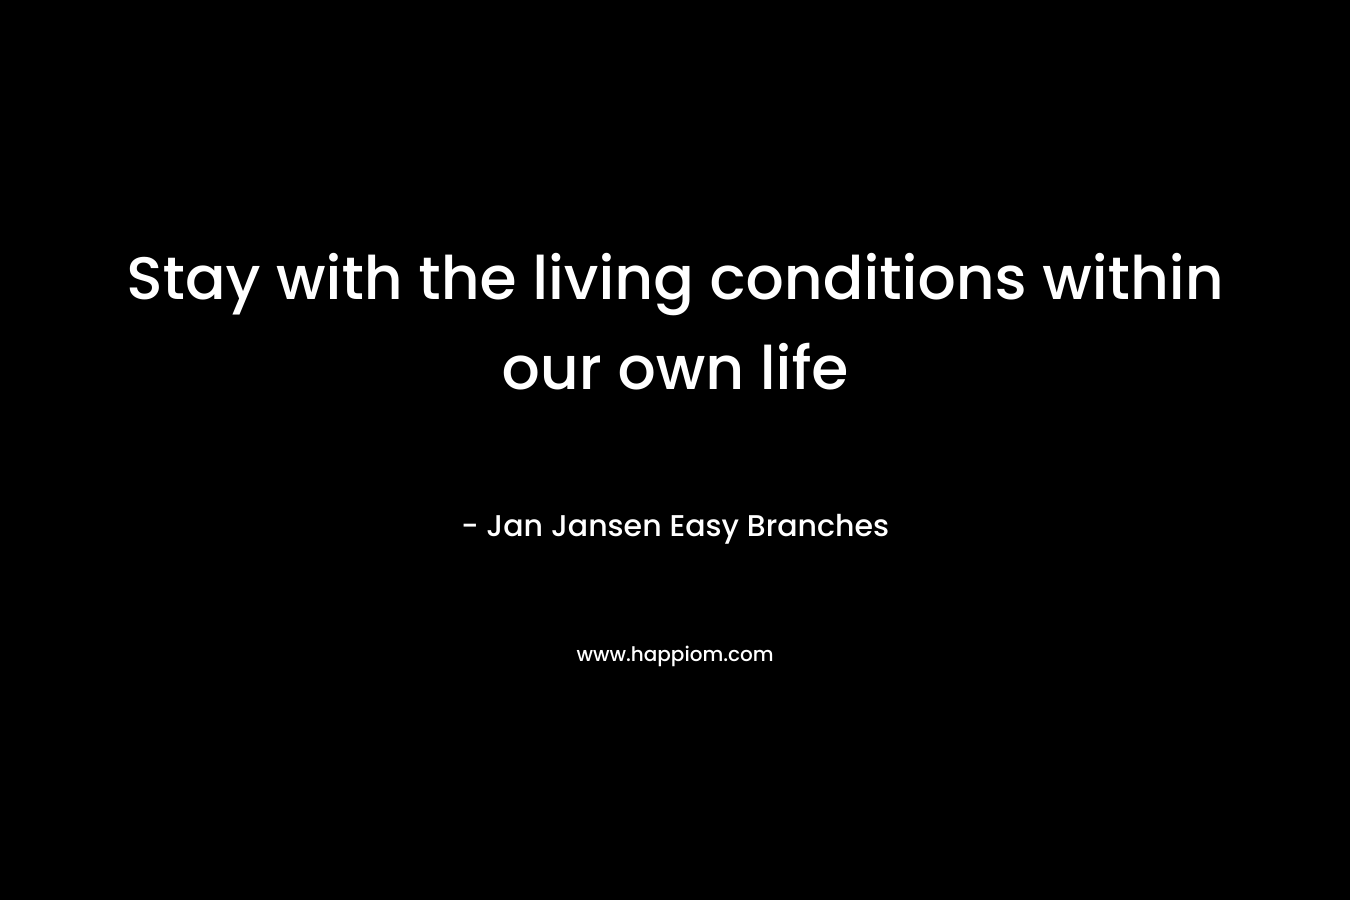 Stay with the living conditions within our own life